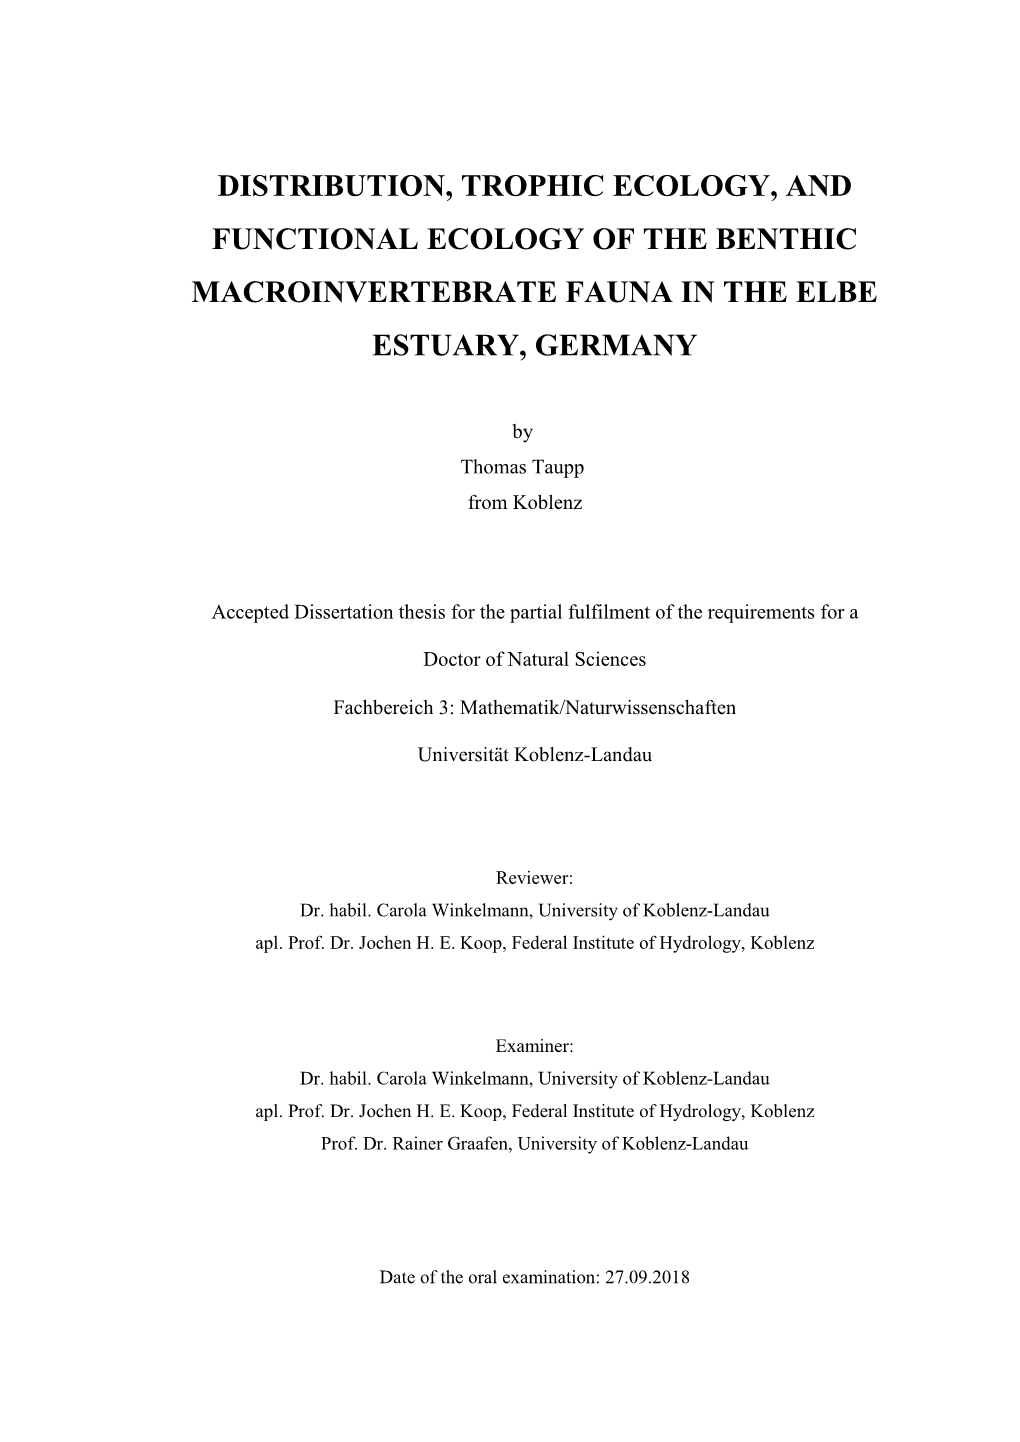 Distribution, Trophic Ecology, and Functional Ecology of the Benthic Macroinvertebrate Fauna in the Elbe Estuary, Germany